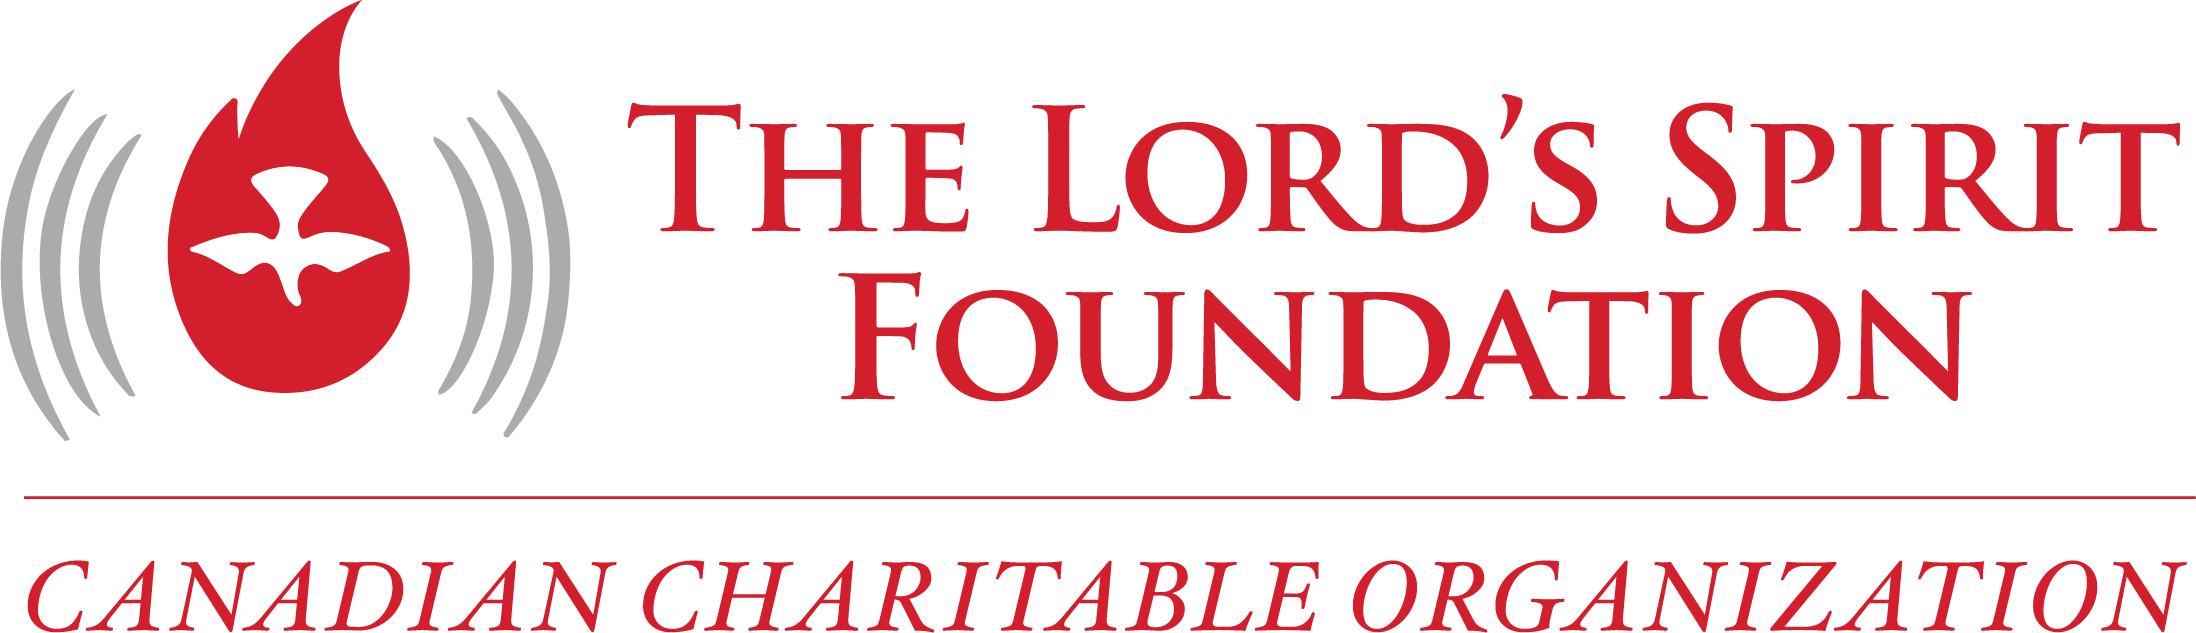 The Lord's Spirit Foundation